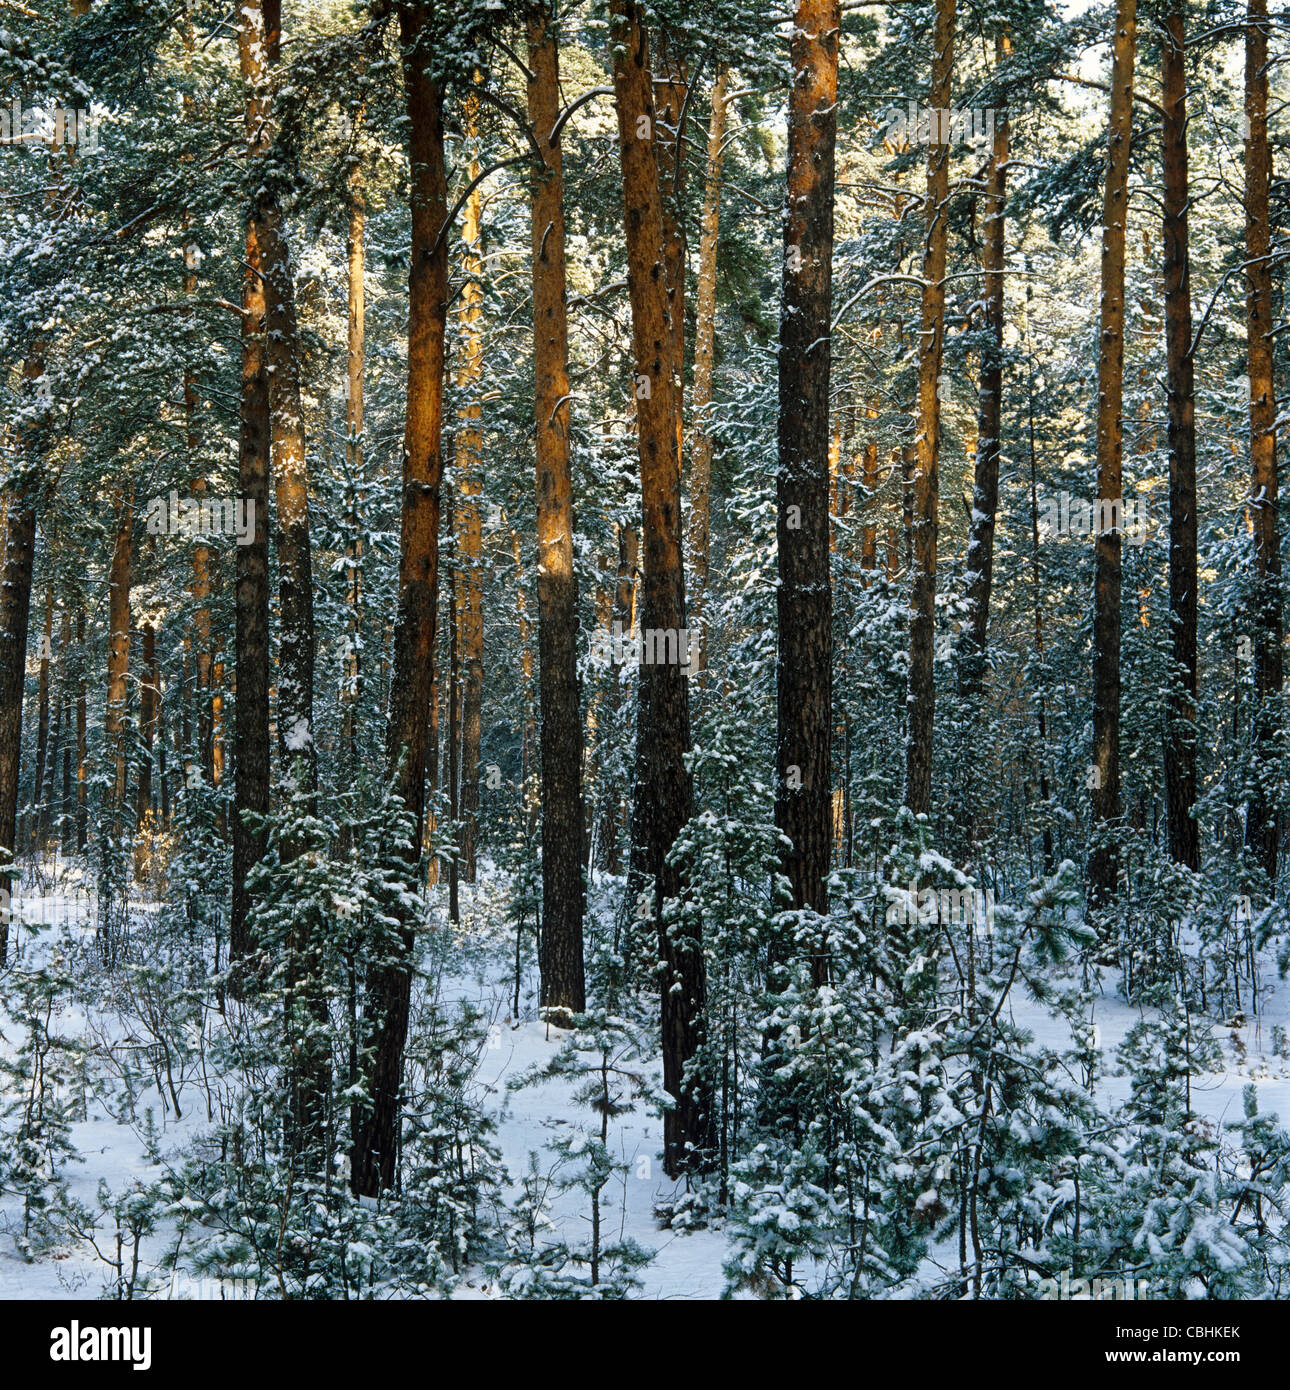 Barnaul Band type pine forest in winter Stock Photo